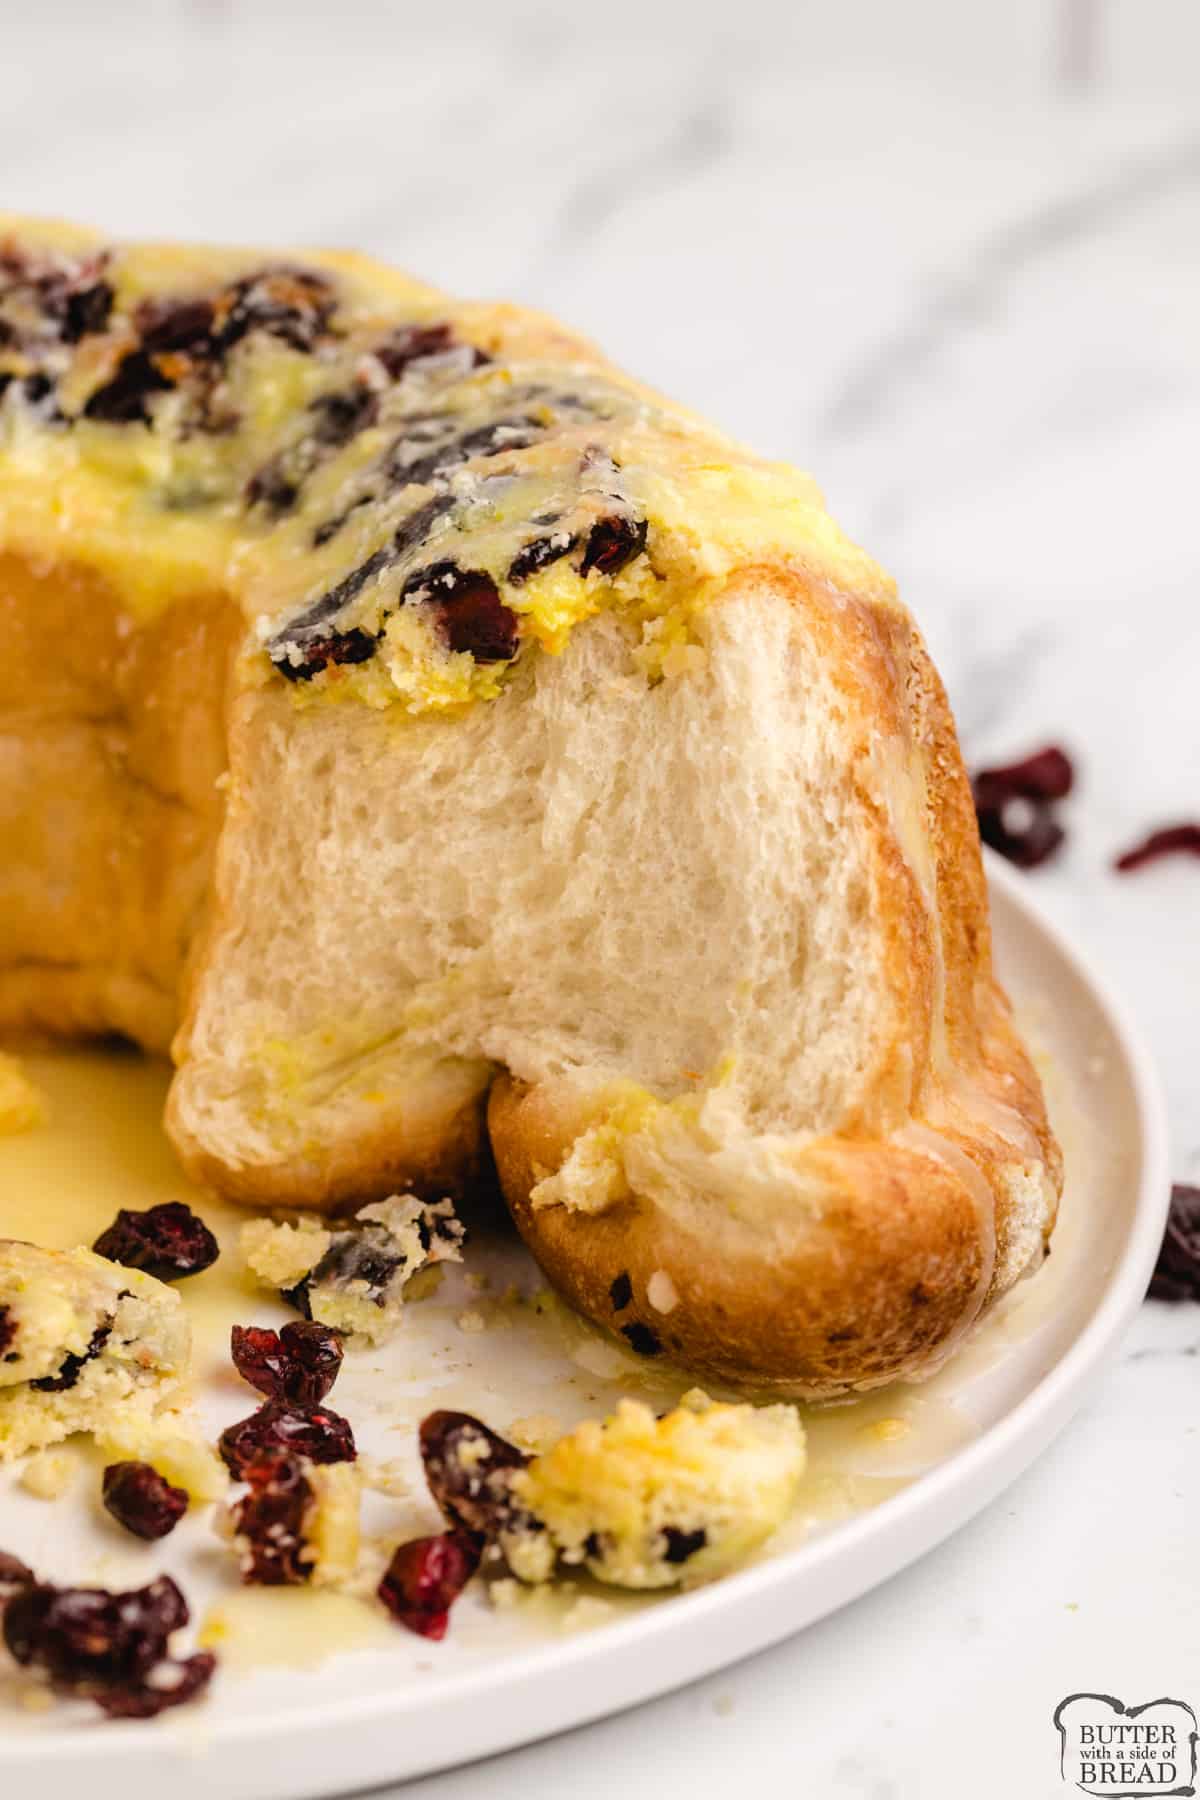 Cranberry Orange Monkey Bread made with frozen rolls, dried cranberries, instant pudding mix and orange juice. Only a few minutes to make these delicious orange pull-aparts that are perfect for fall!